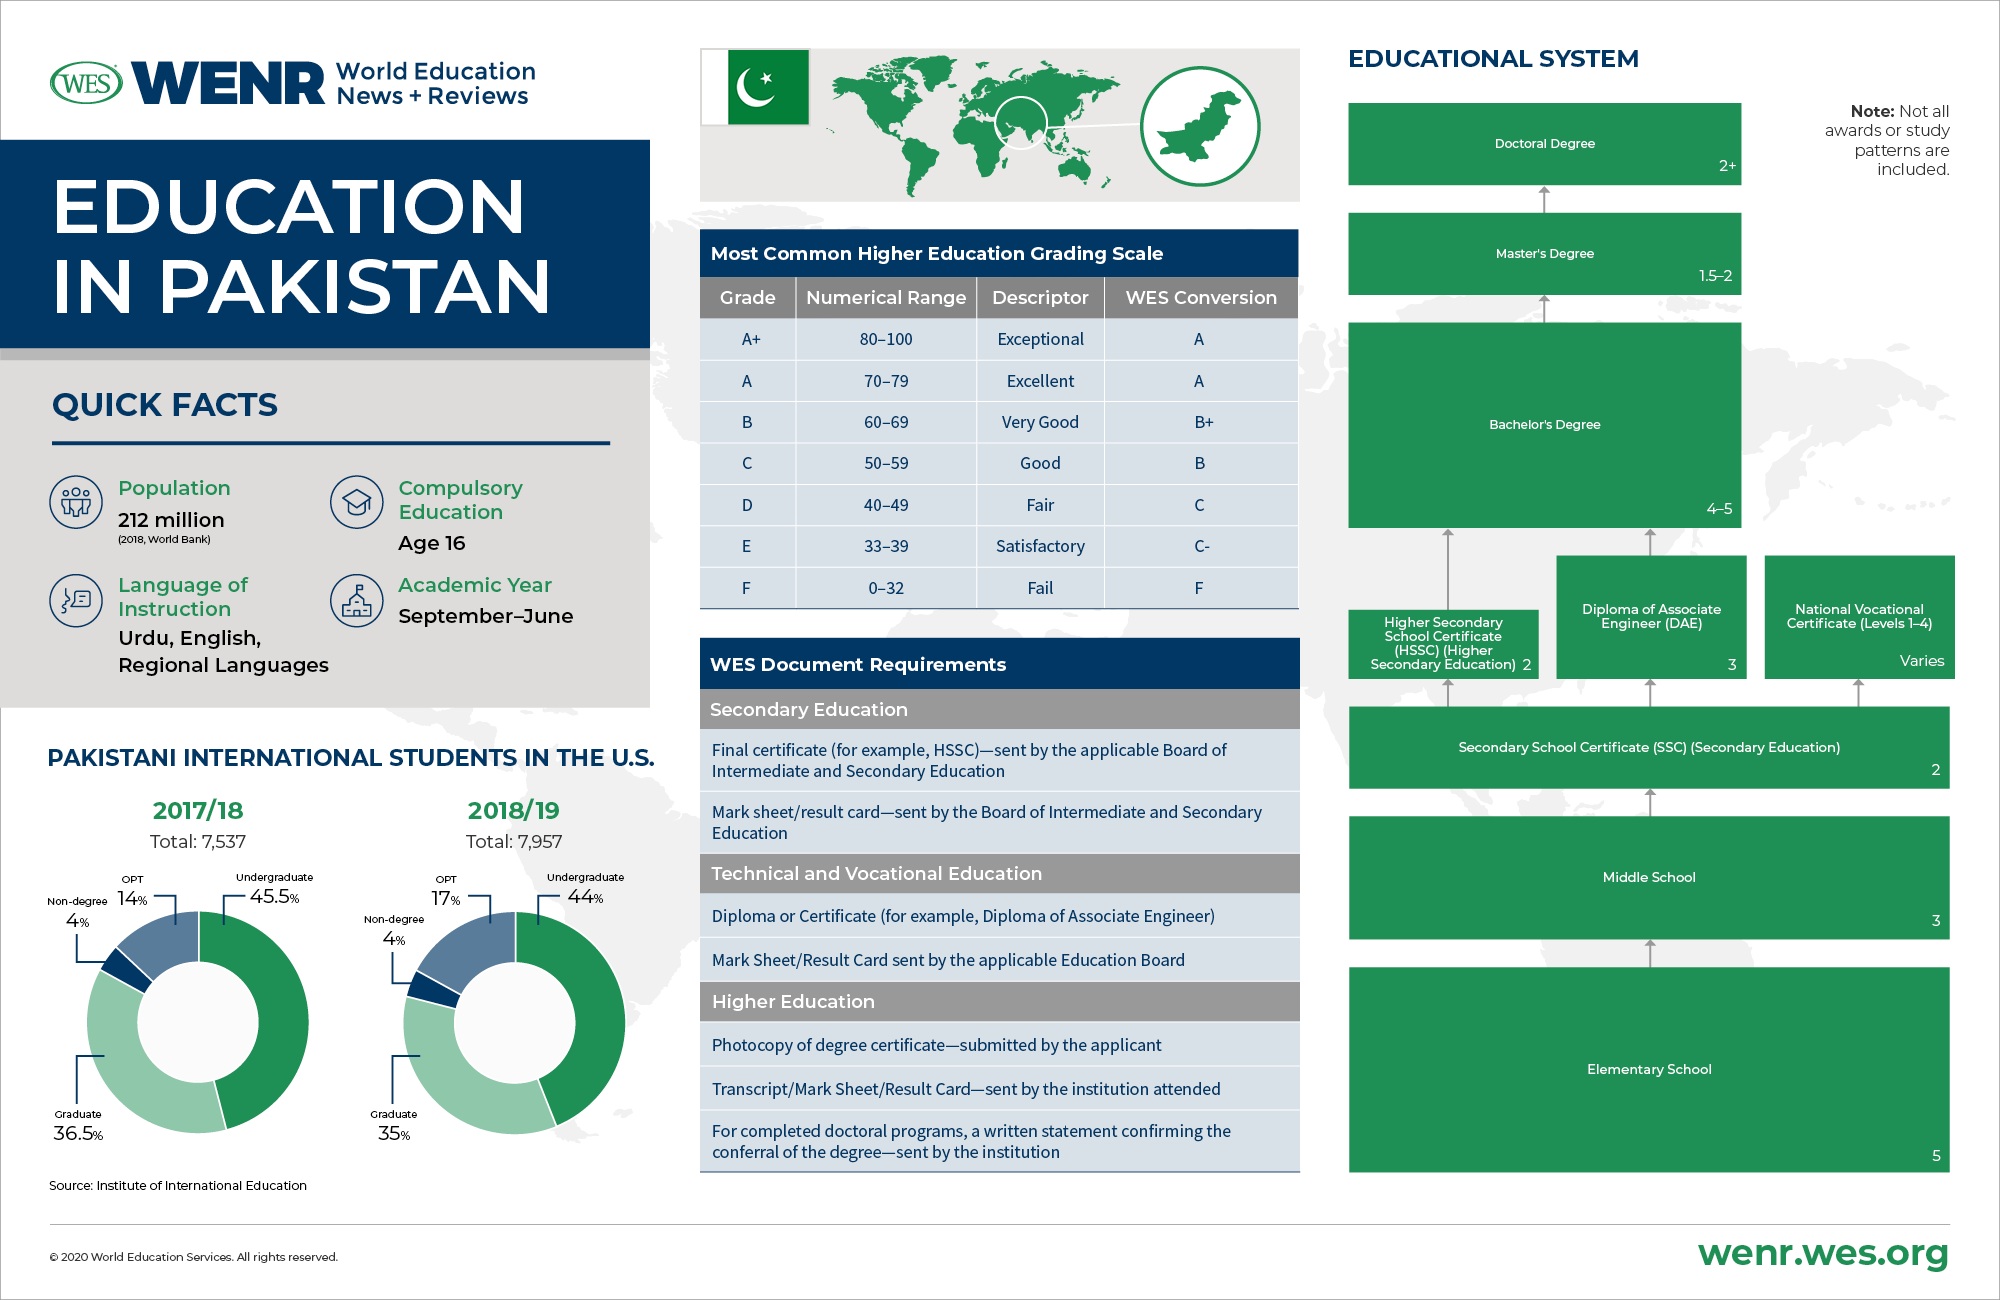 Education in Pakistan infographic: quick facts about education in Pakistan